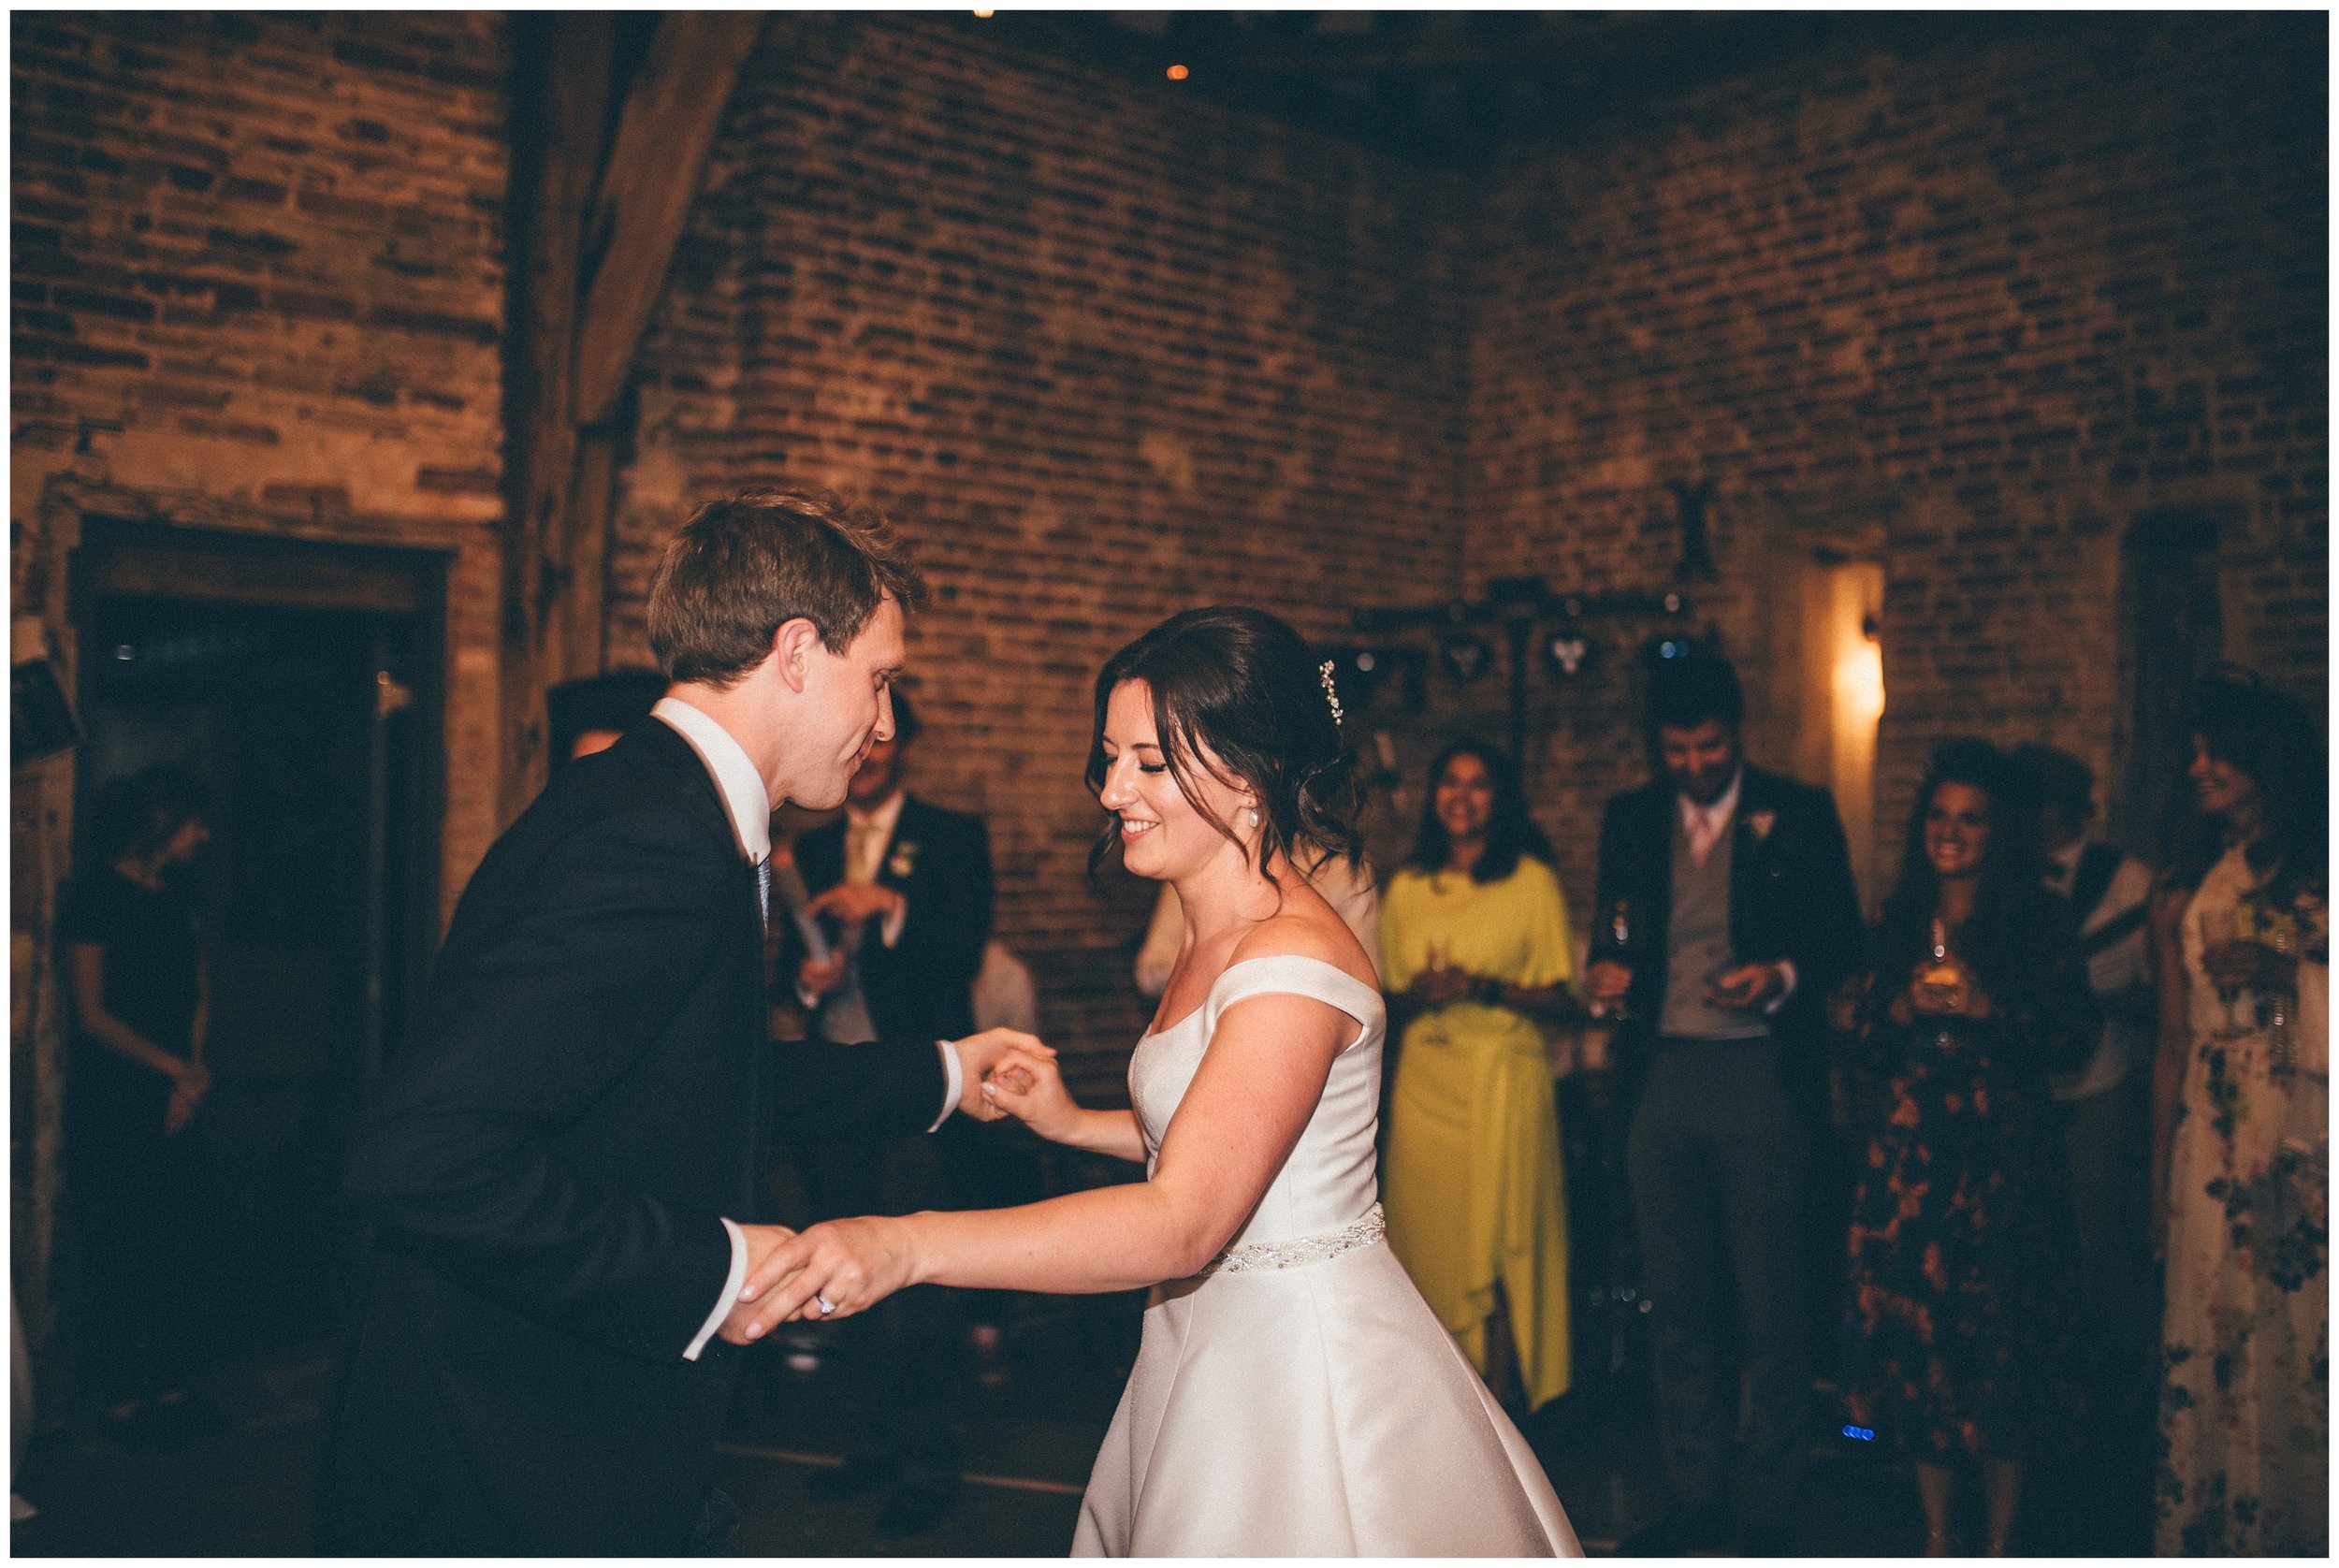 Bride and groom's First Dance at Henham Park wedding barns in Southwold.